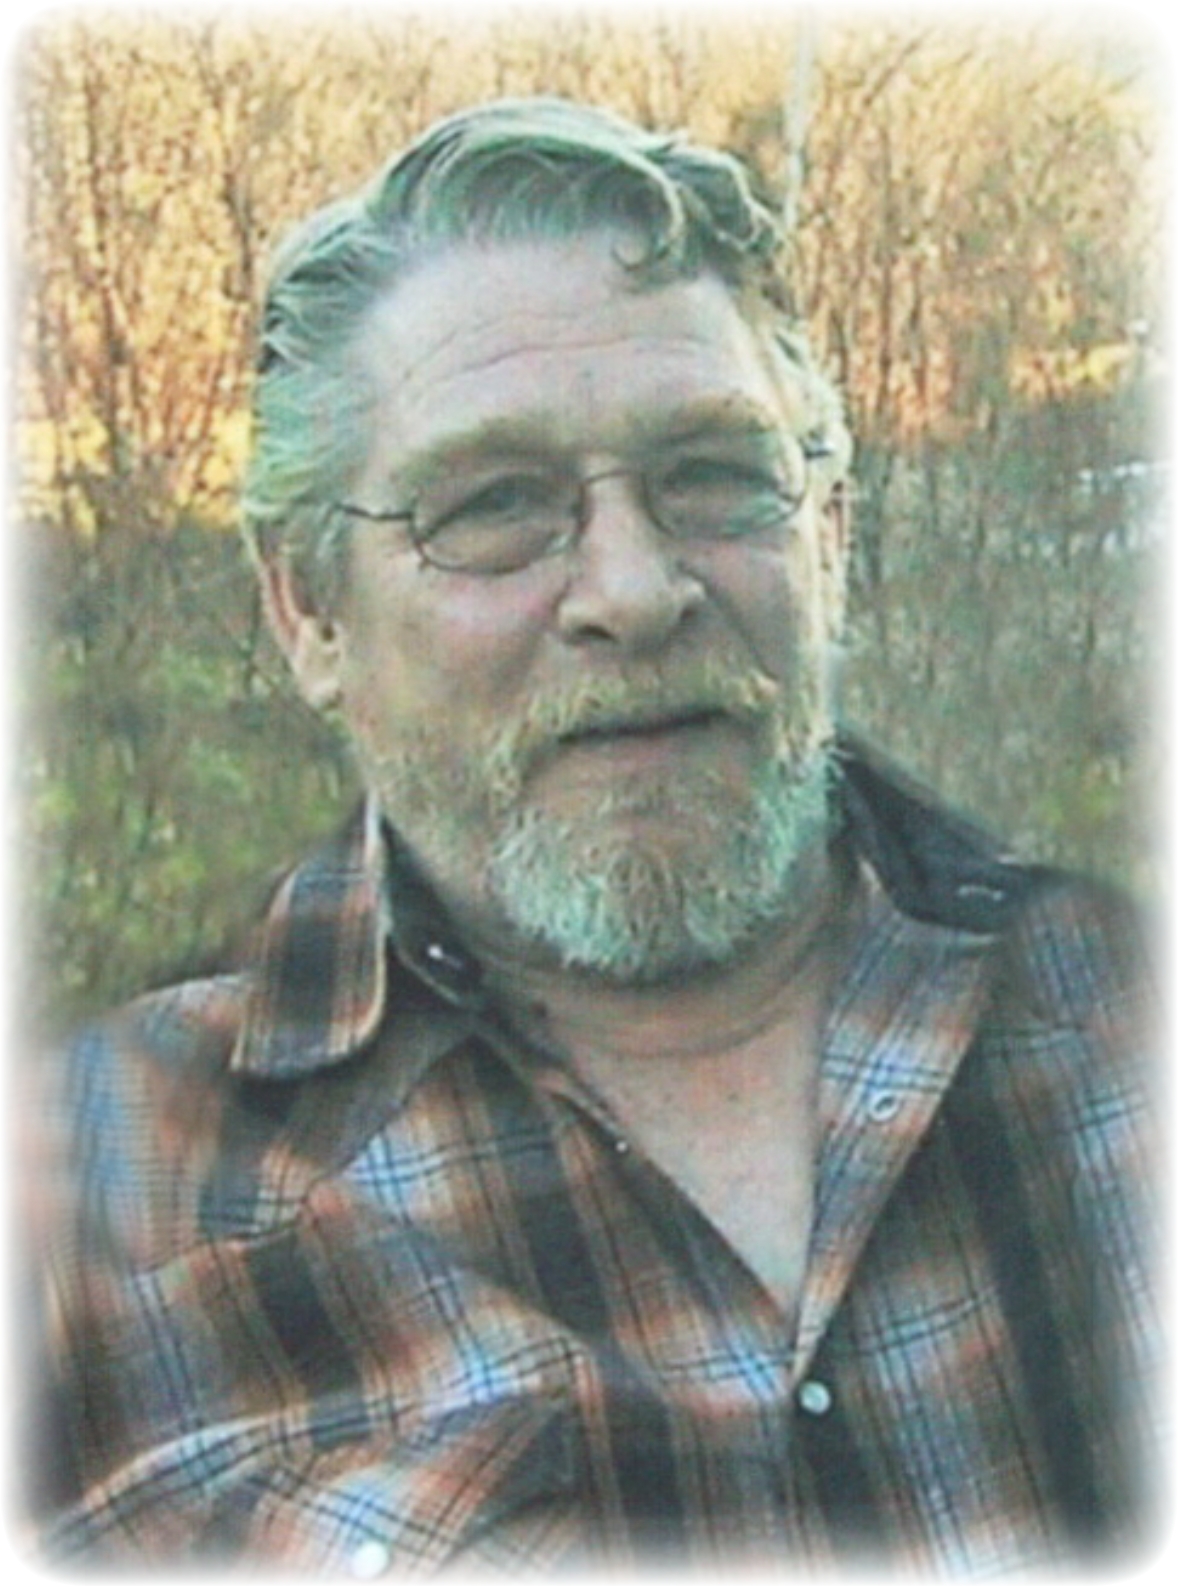 Obituary information for Larry Caldwell